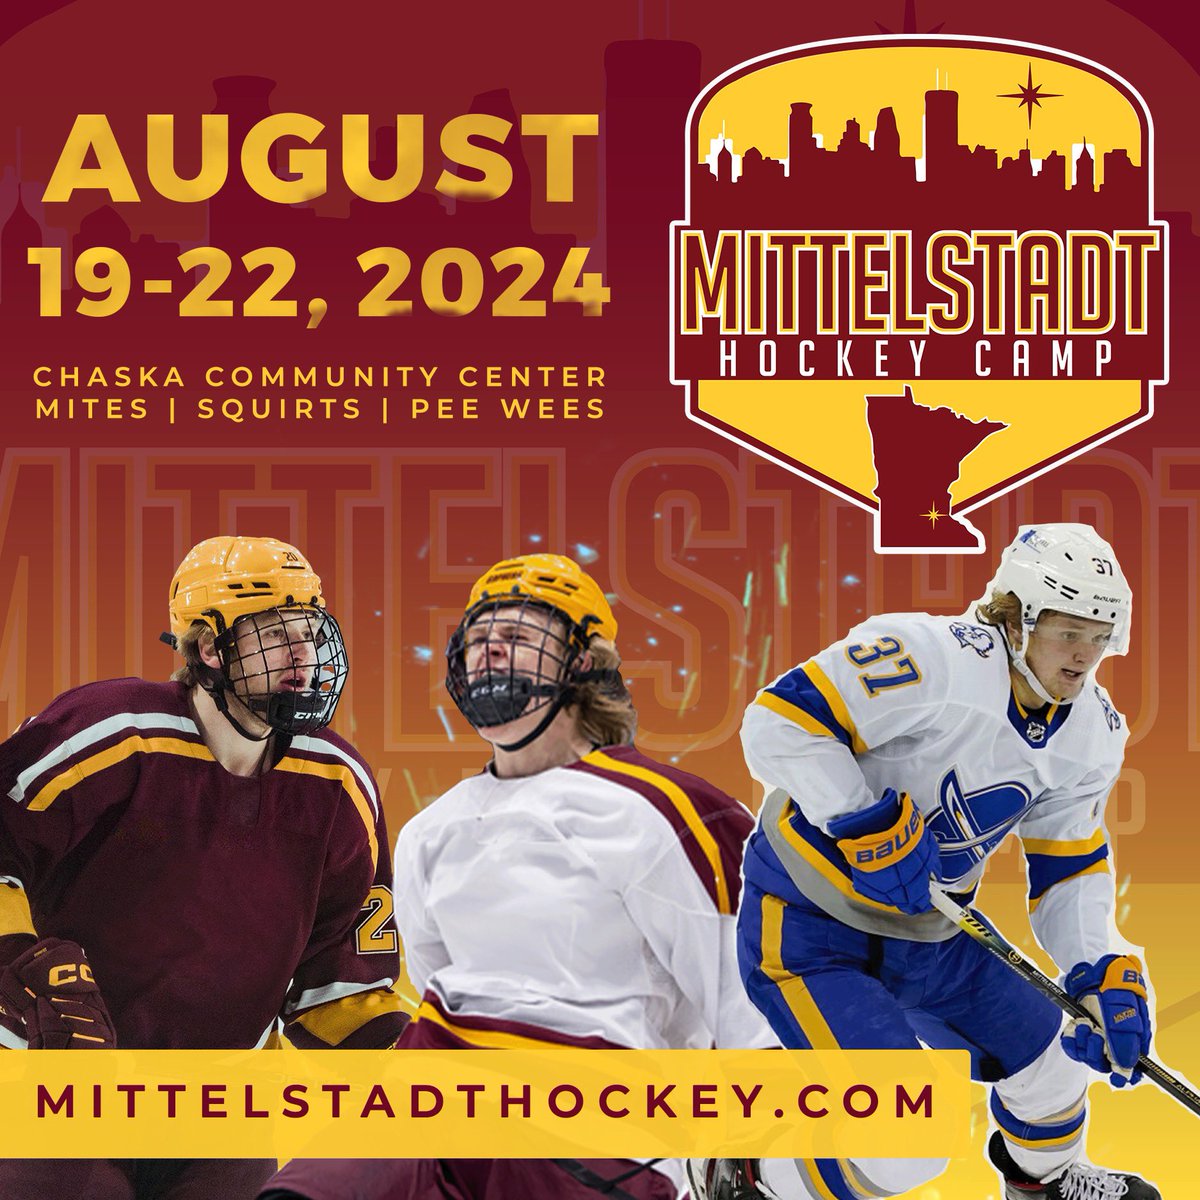 Register now for the first MITTELSTADT HOCKEY CAMP August 19-22, 2024 in Chaska, MN! Learn from Division 1 Players and elite coaches plus a special appearance by our brother Casey! All Day camp for Mites, Squirts, and Pee Wees! Open to boys and girls! Link in bio for more info!